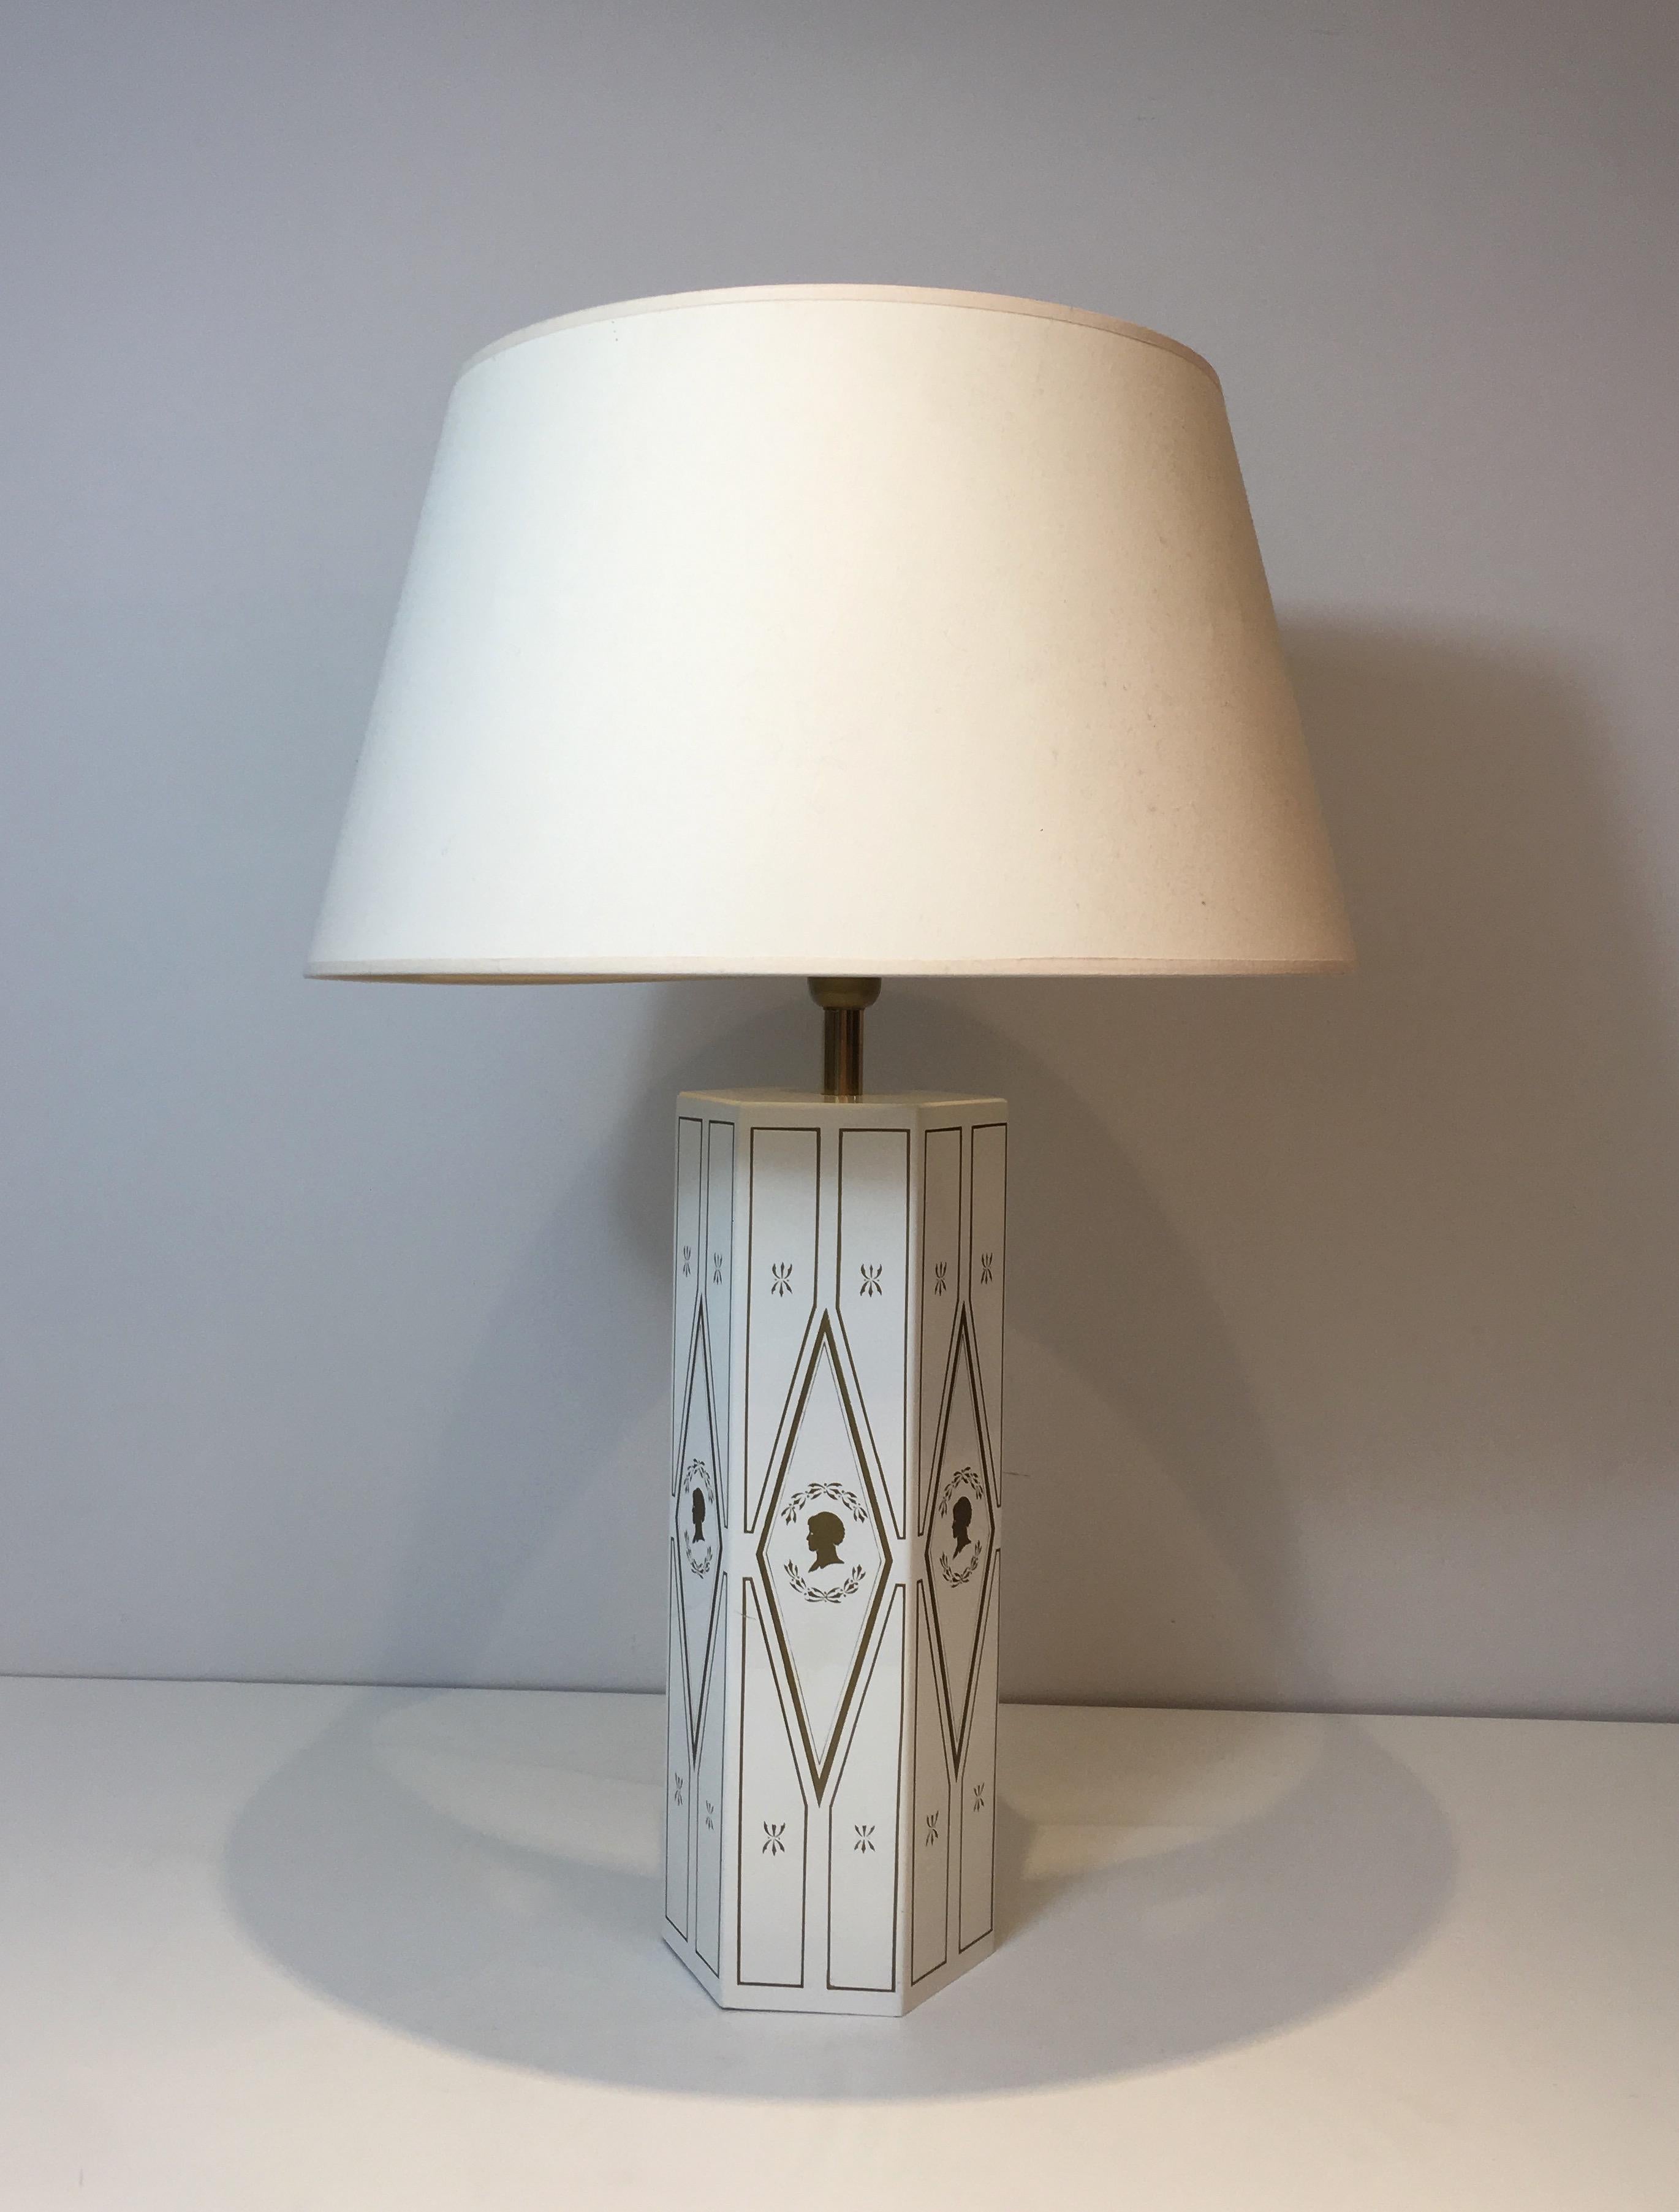 Late 20th Century Neoclassical Style White Lacquered Sheet Metal Table Lamp with Gilt Decors